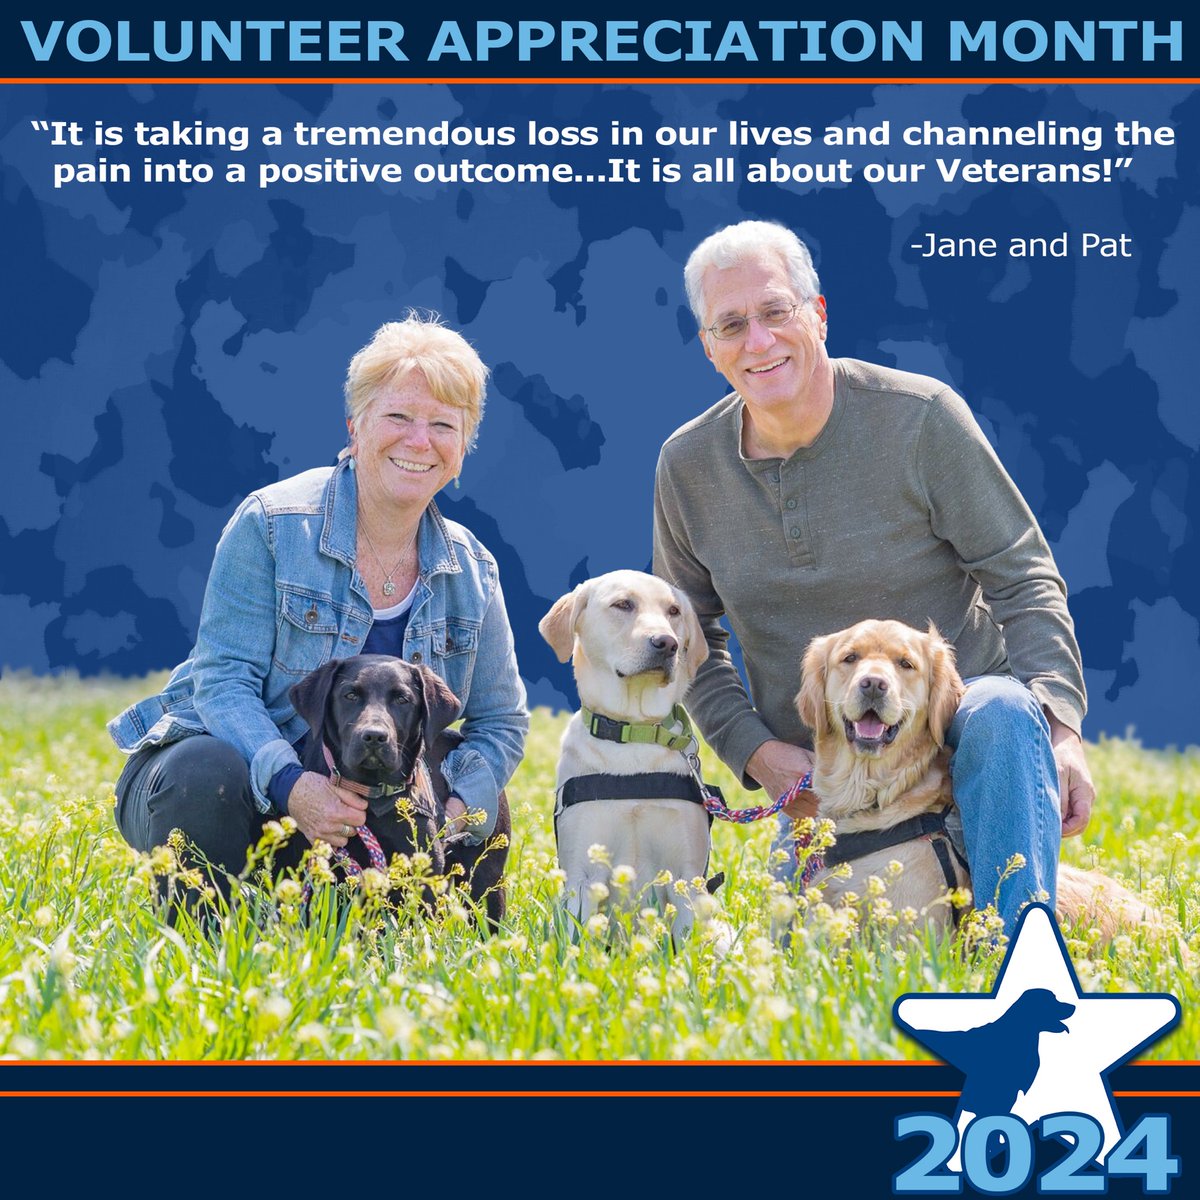 April is #VolunteerAppreciationMonth, and we will be shining a light on our volunteers all month long!

Thank you, Jane and Pat, for all that you do! We are happy and grateful to have you as part of our pack!

#FurTheLoveOfVeterans #GlobalVolunteerMonth